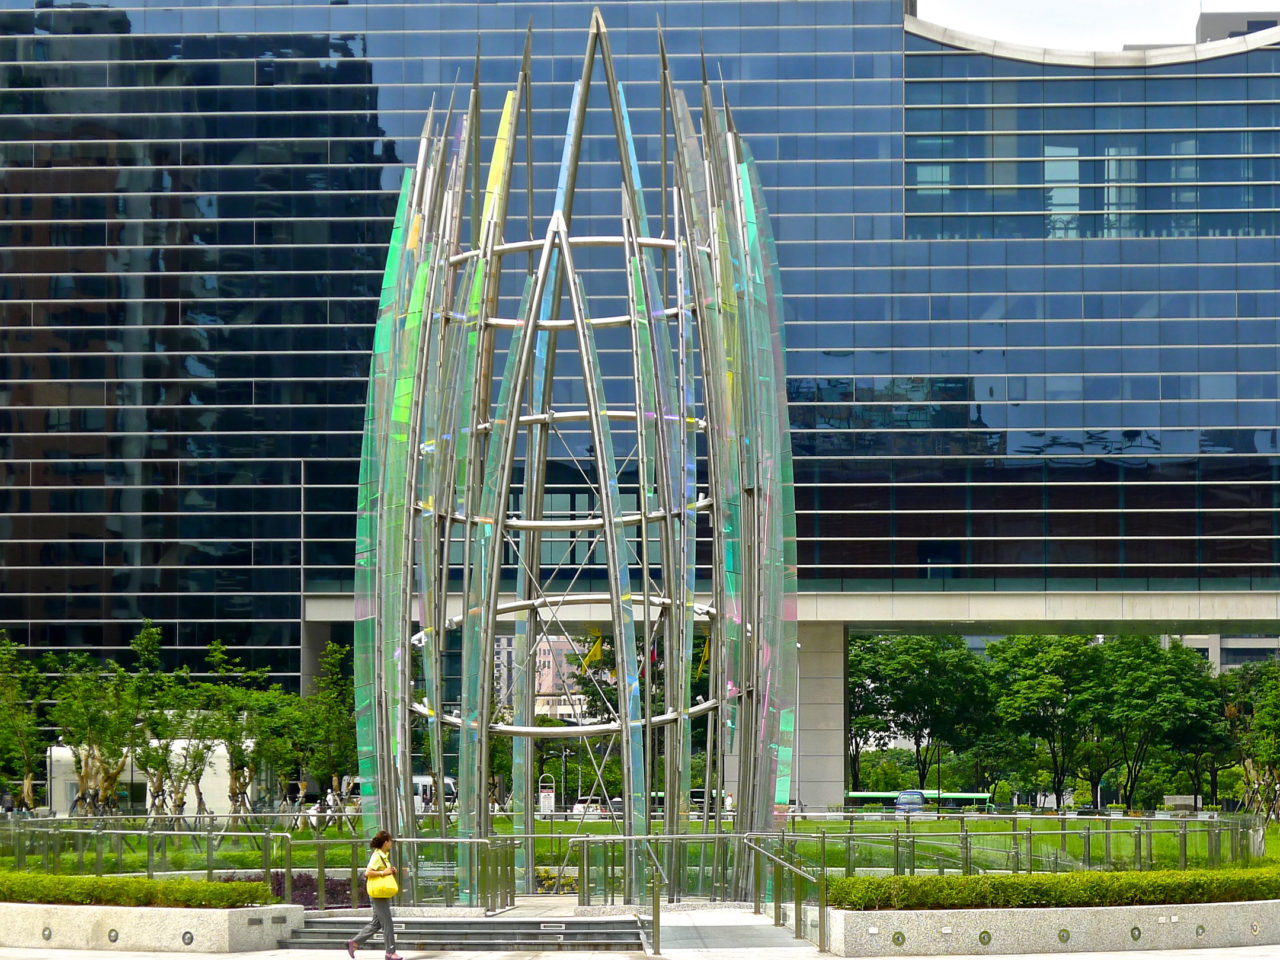 Taichung, Taiwan Civic Center monumental sculpture: Stainless Steel and Laminated Dichroic Glass. During the day, light plays off polished surfaces of stainless steel and laminated glass of the sculpture, Crocus. / image 3